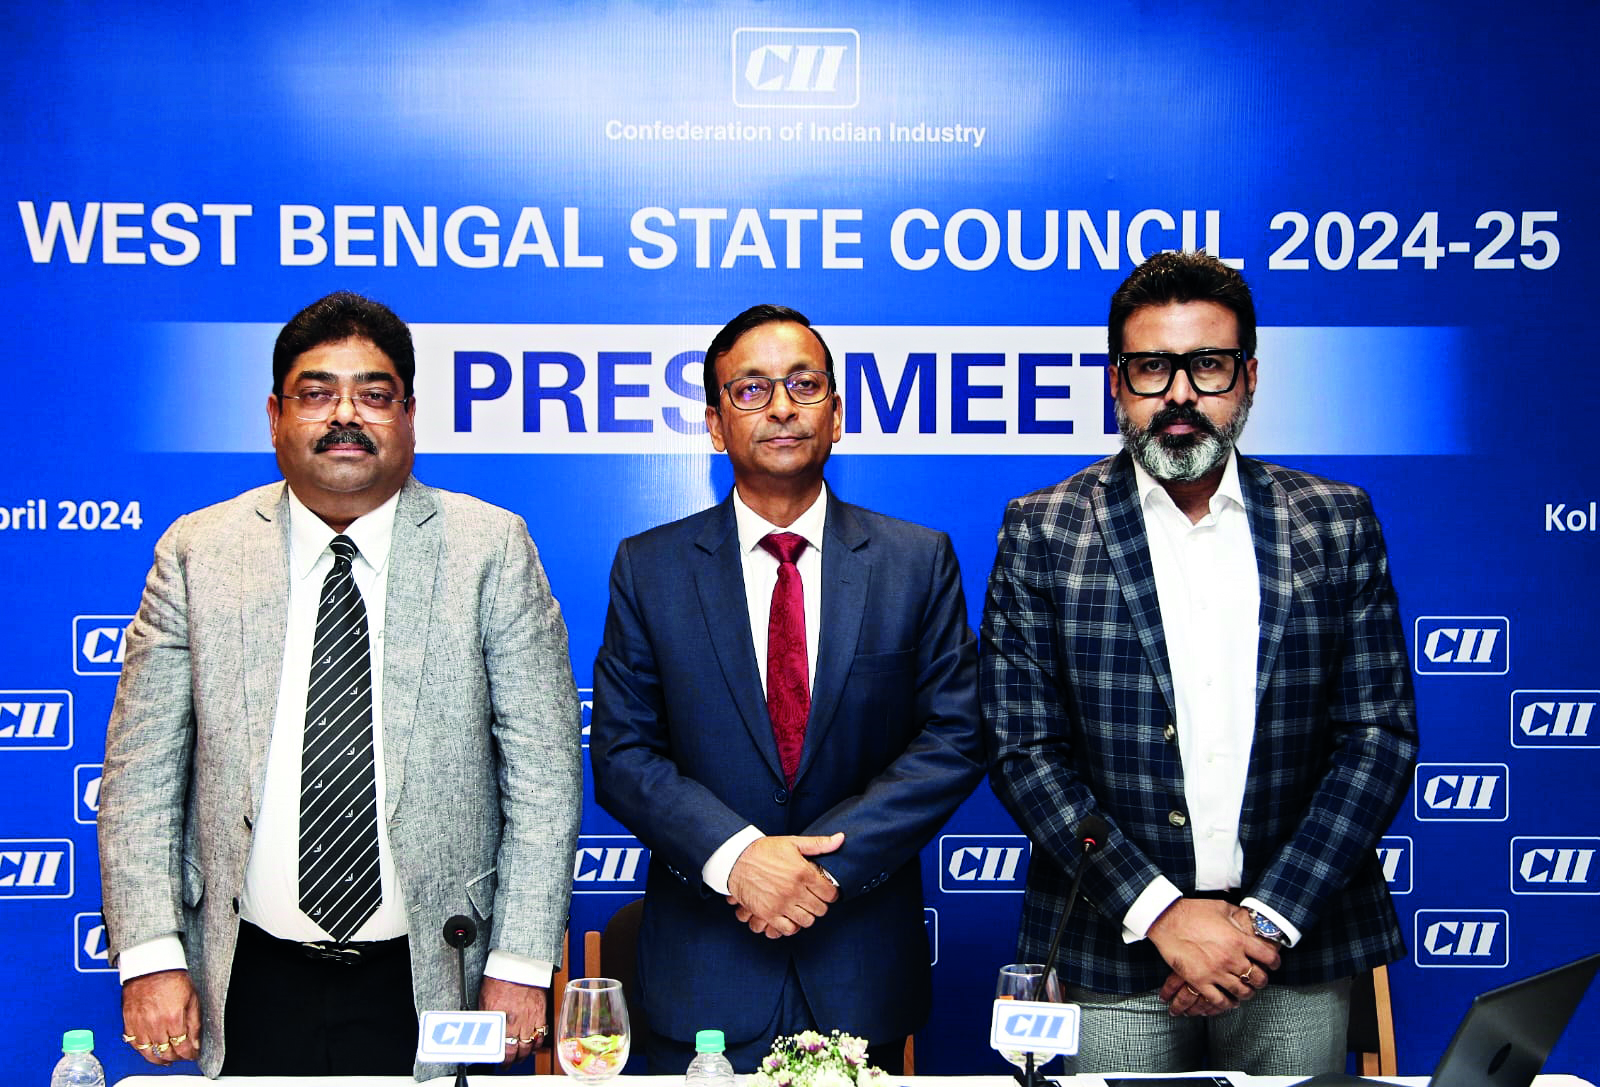 New roles: Sandeep Kumar to lead CII West Bengal for 2024-25